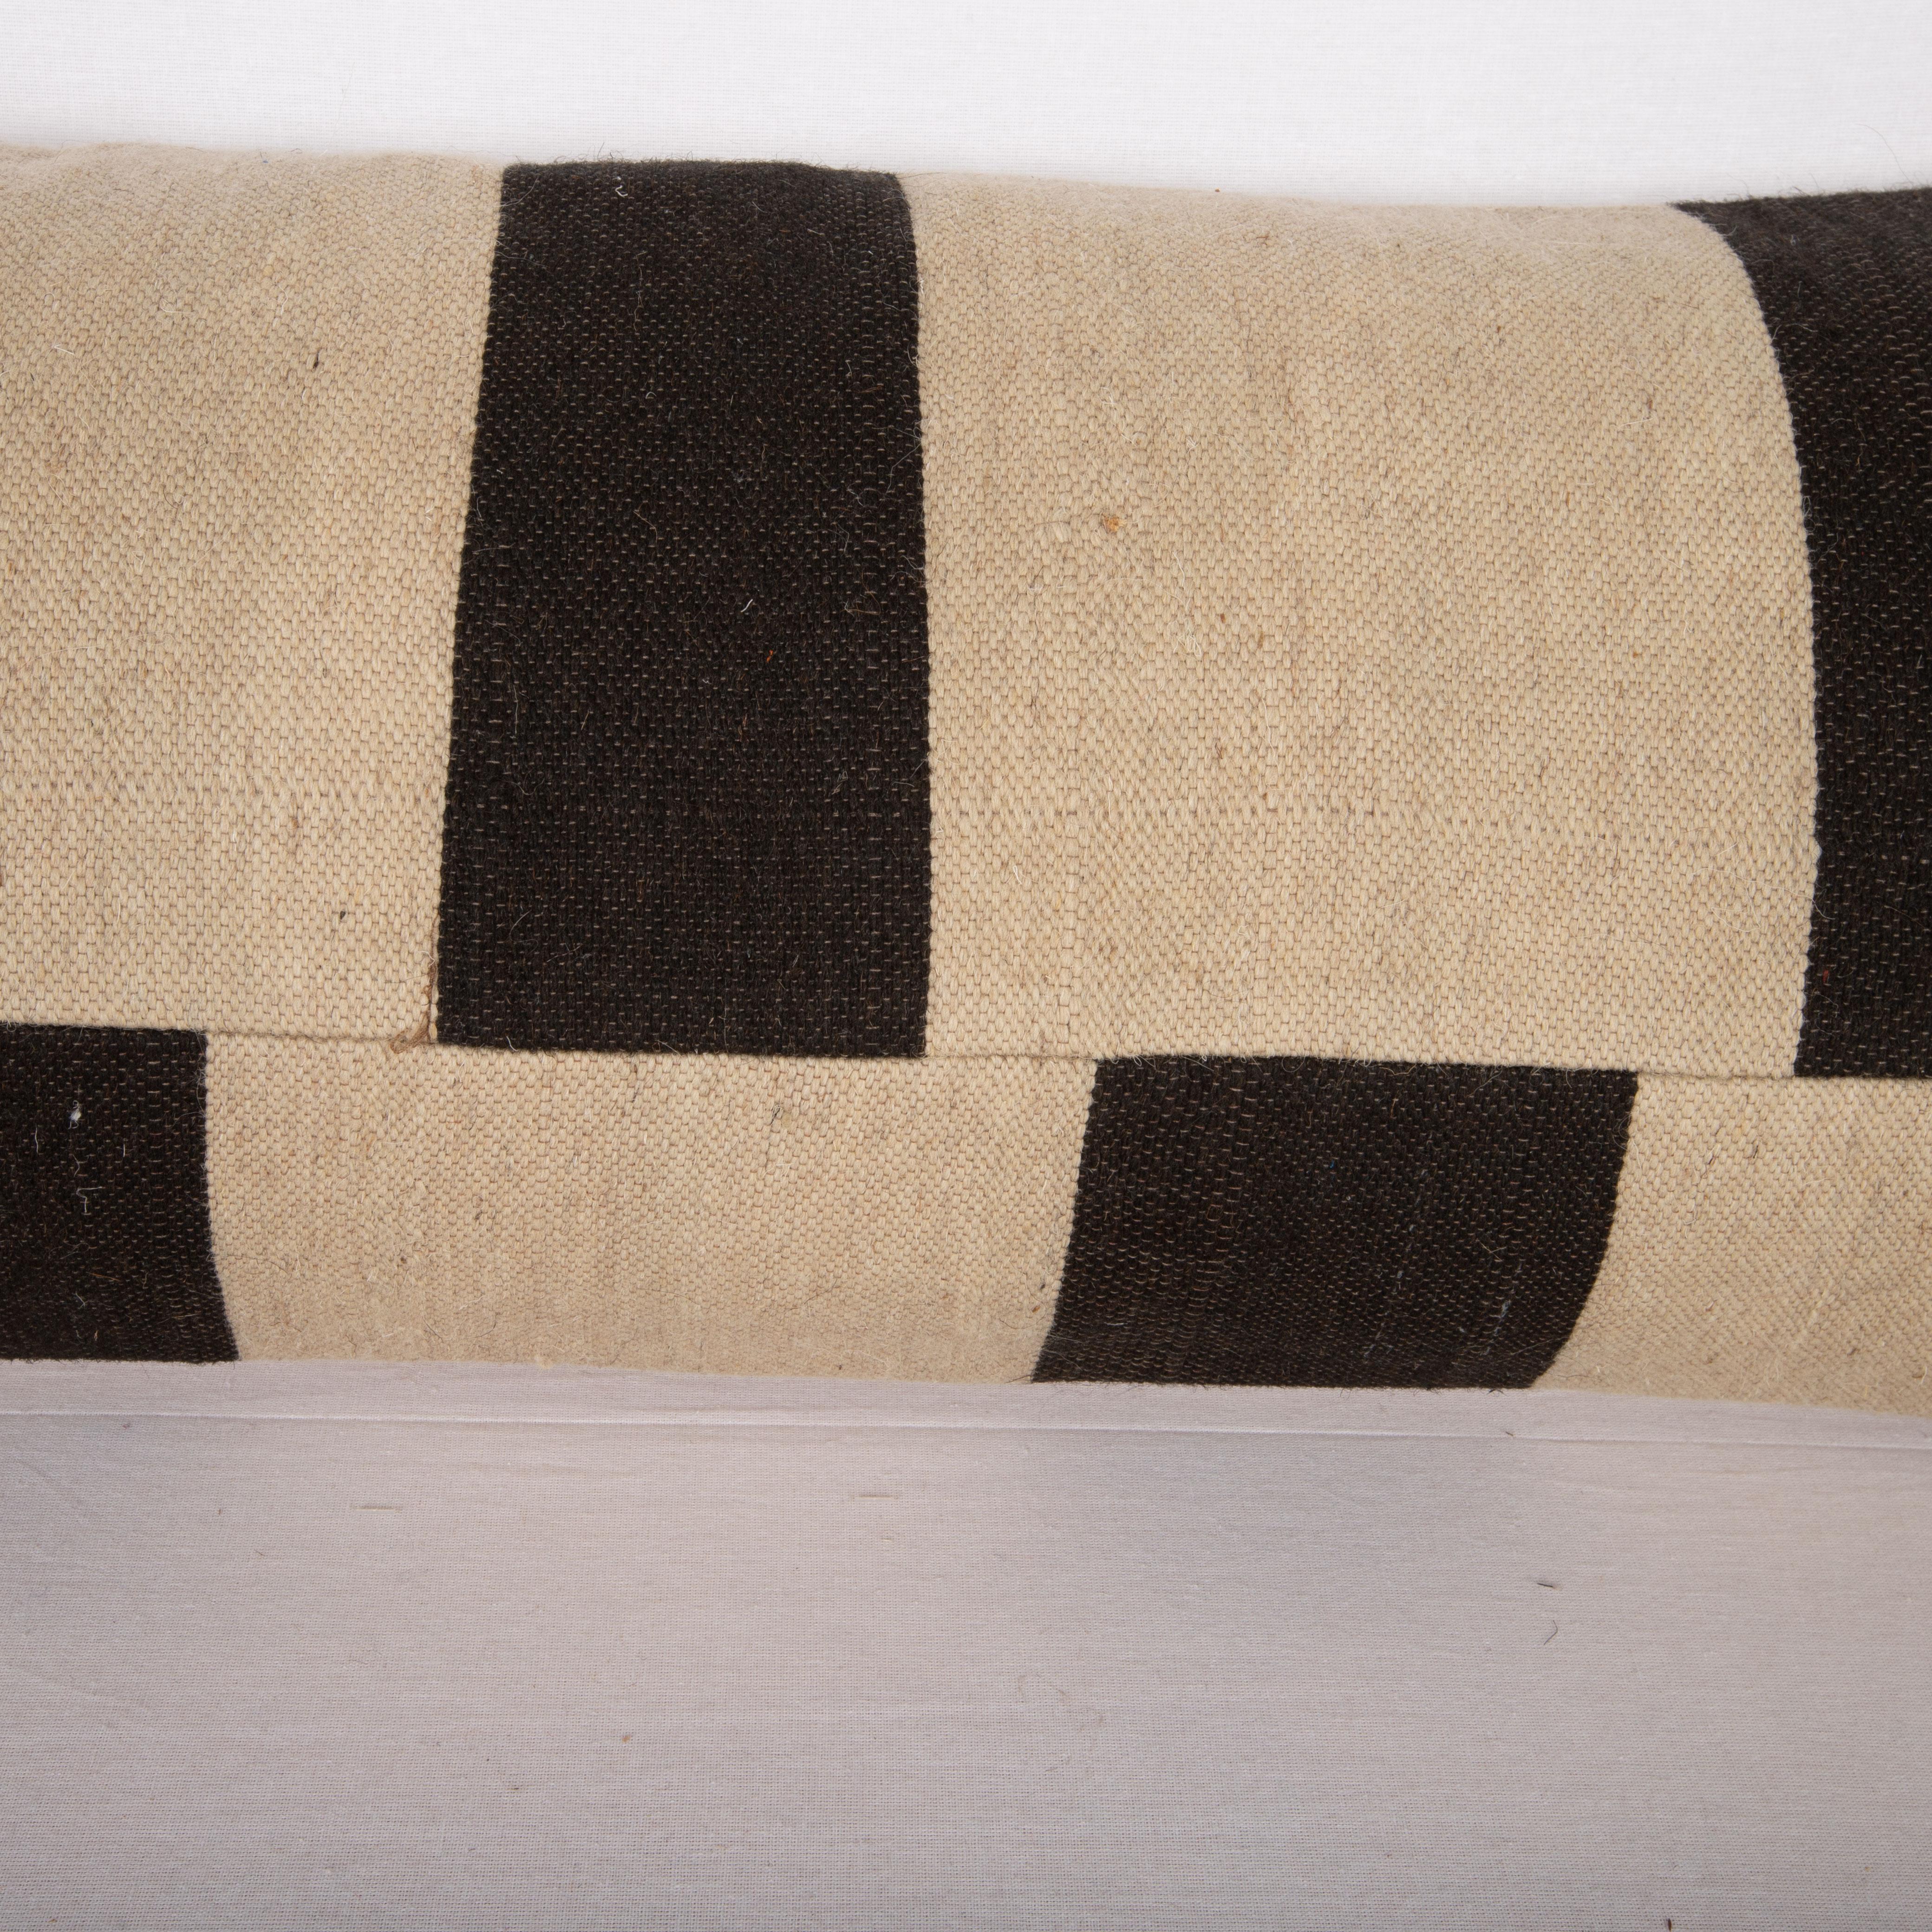 Hand-Woven Black and White Lumbar Pillow Cover Made from a Contemporary Textile For Sale